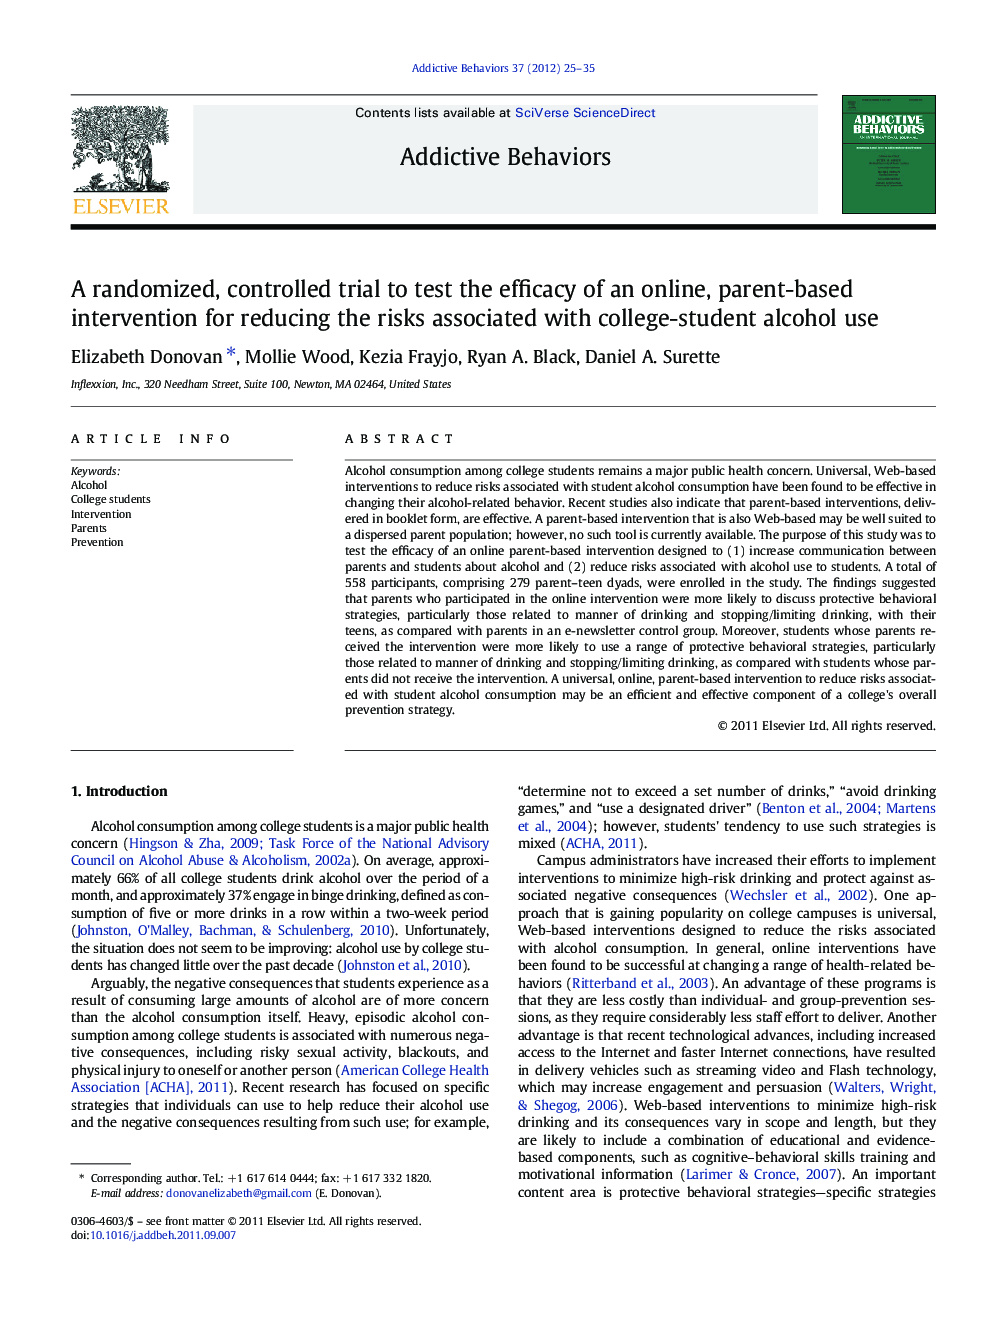 A randomized, controlled trial to test the efficacy of an online, parent-based intervention for reducing the risks associated with college-student alcohol use